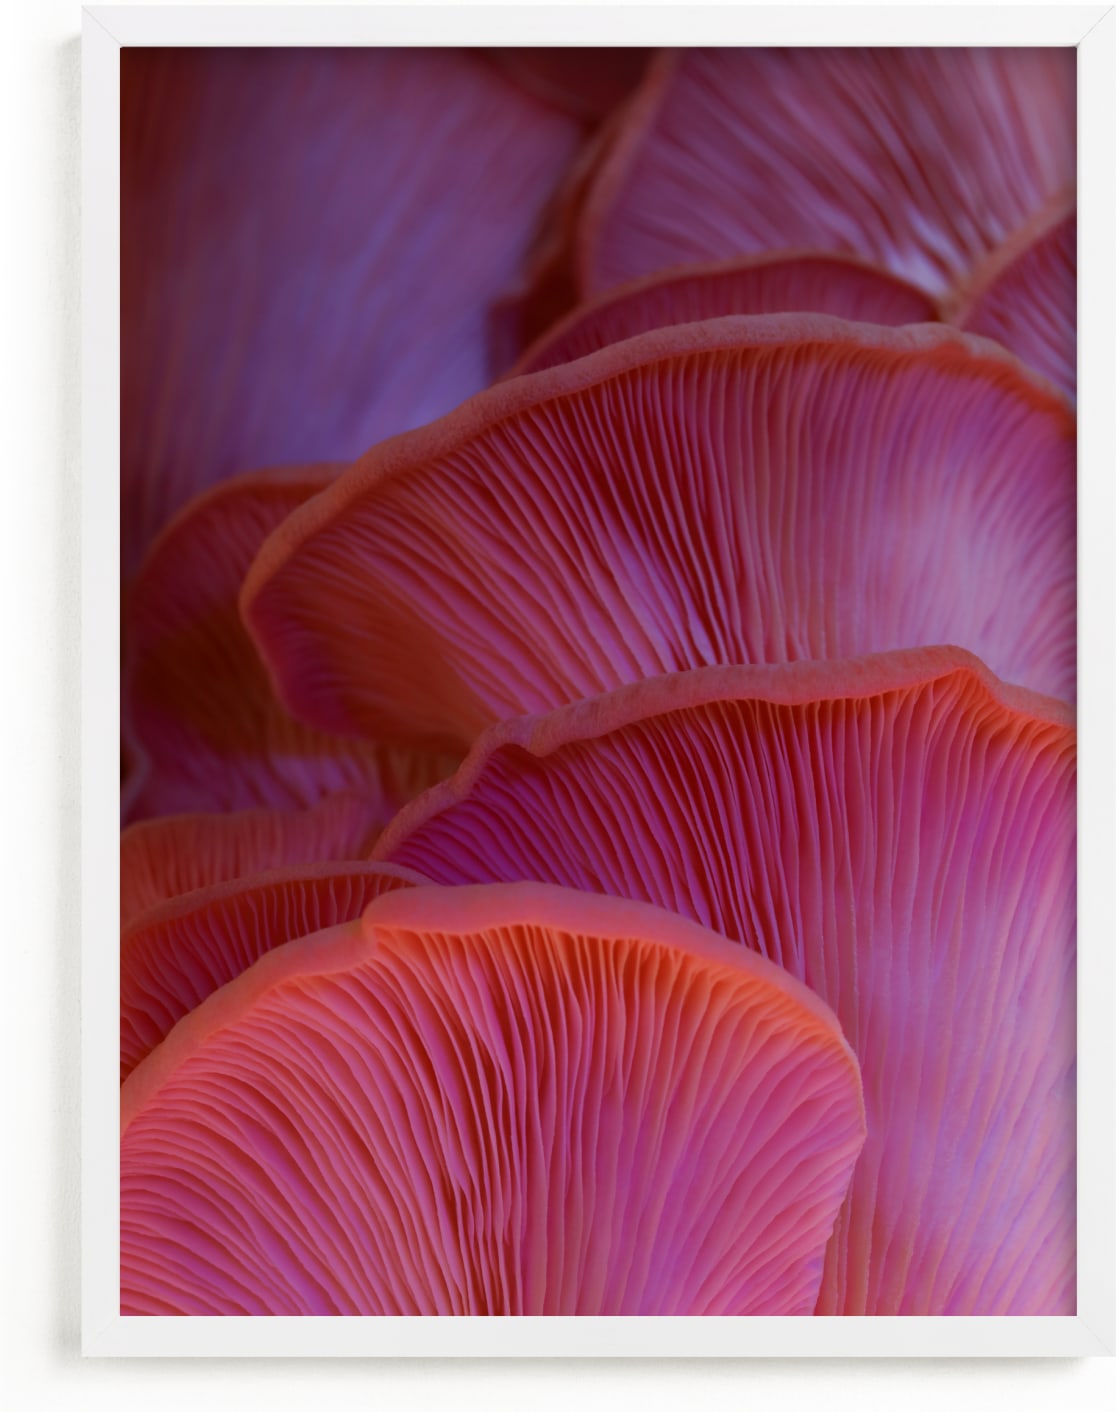 This is a purple art by Elena Kulikova called Pink Oyster Mushrooms.